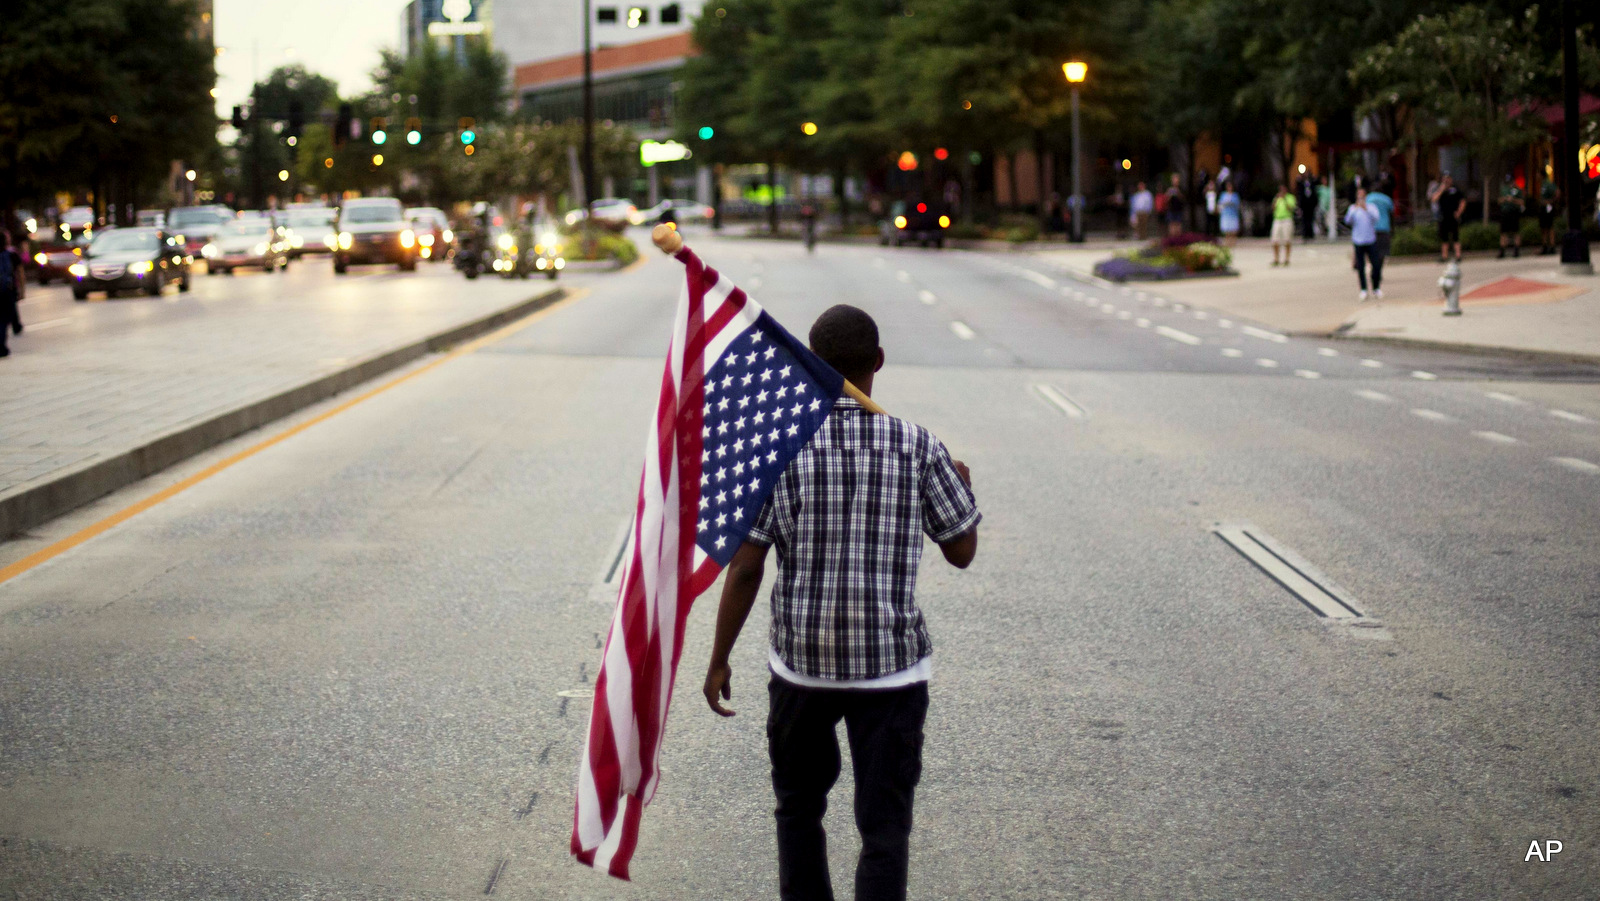 Skylar Barrett walks with an American flag in the middle of the street during a march through the Buckhead neighborhood against the recent police shootings of African-Americans on Monday, July 11, 2016, in Atlanta.